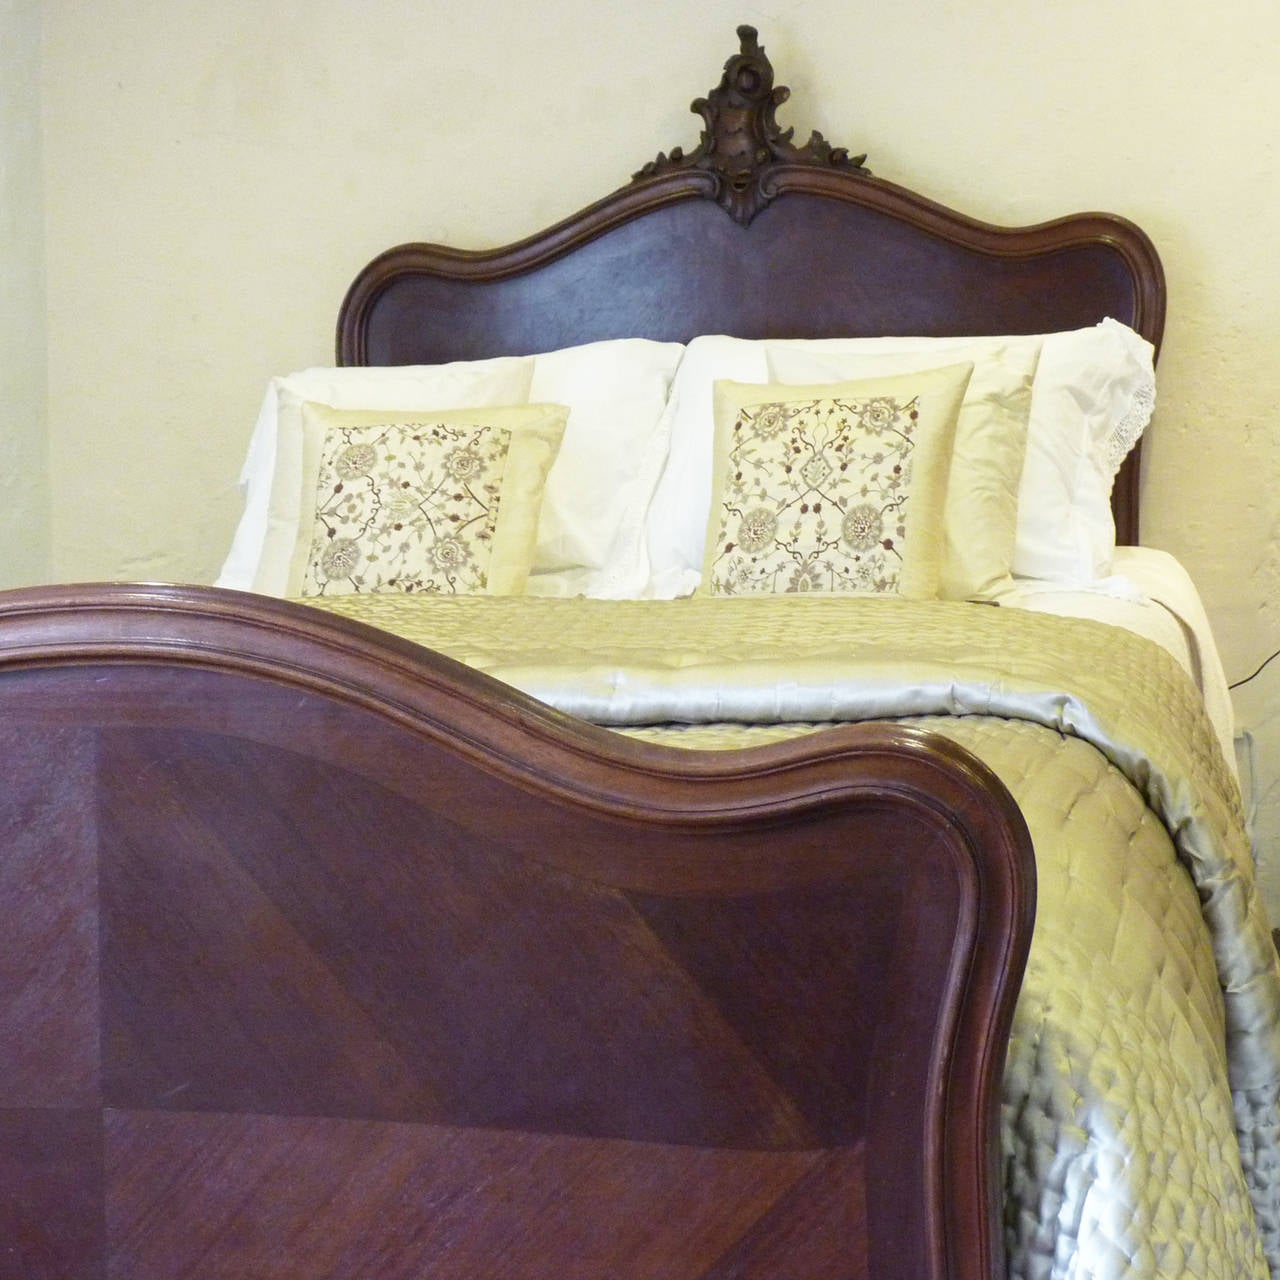 A fine quarter veneer panelled Louis XV style antique bed in dark walnut. Circa 1900.

The bed is 5 ft wide (60 in or 150 cm), and accepts a British King Size or an American Queen mattress.

We have adapted this bed to take a 5 ft wide mattress